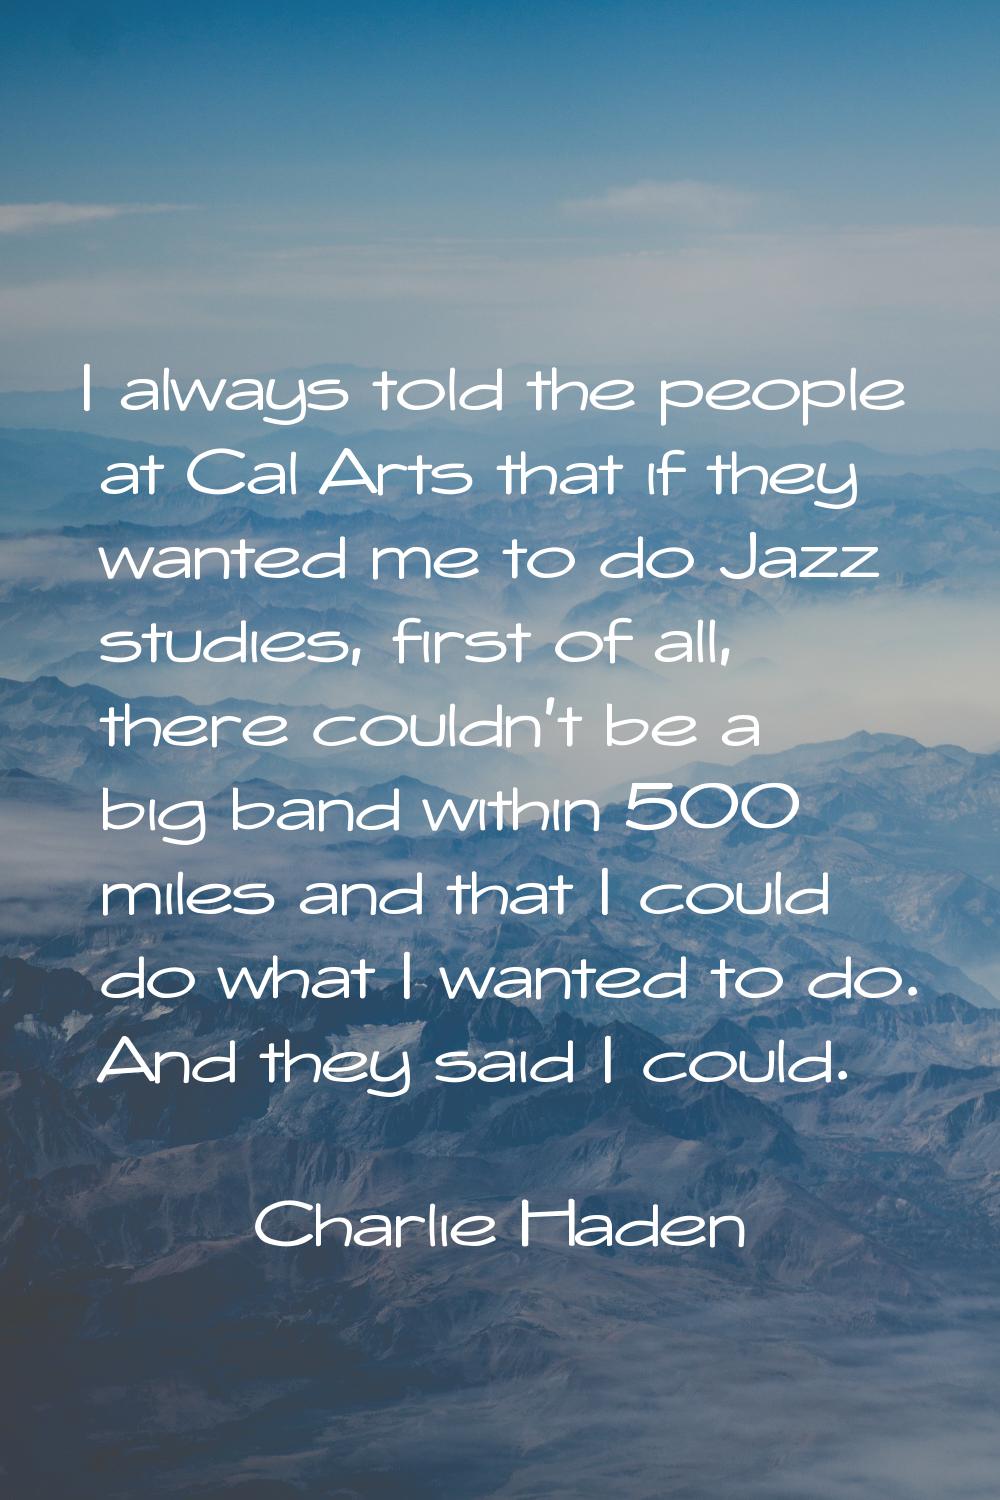 I always told the people at Cal Arts that if they wanted me to do Jazz studies, first of all, there